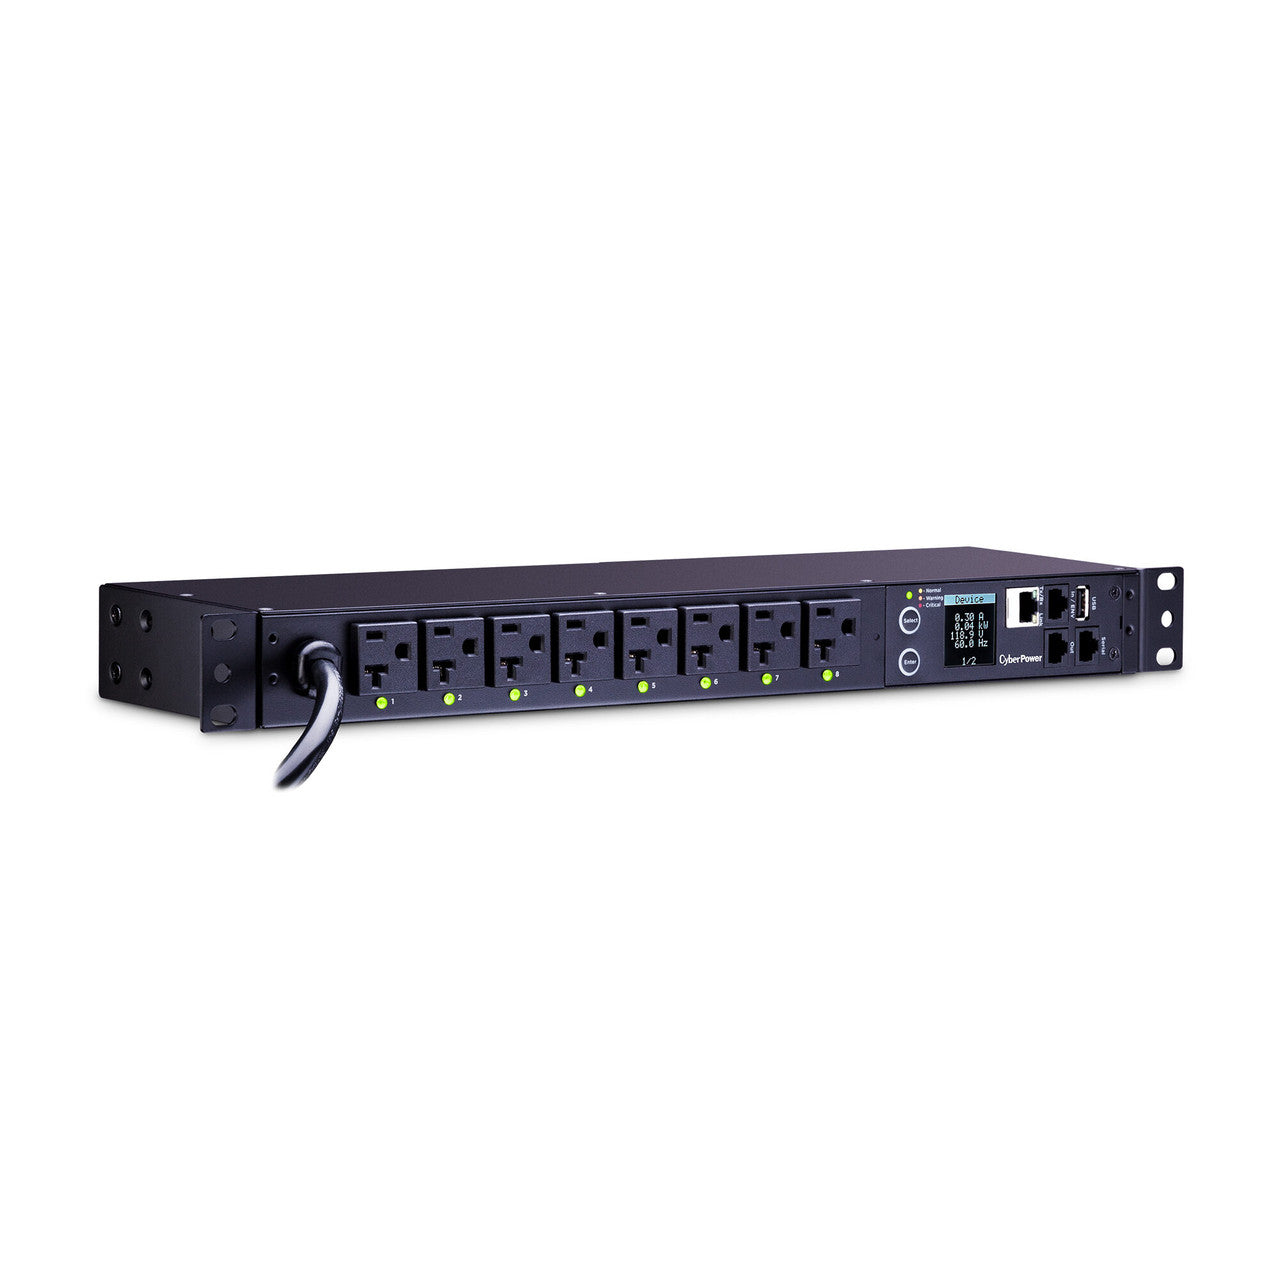 CyberPower PDU81002 SW MBO PDU 20A 120V Metered-by-Outlet Switched PDU 8 NEMA Outlets 12ft cord 3yr Warranty